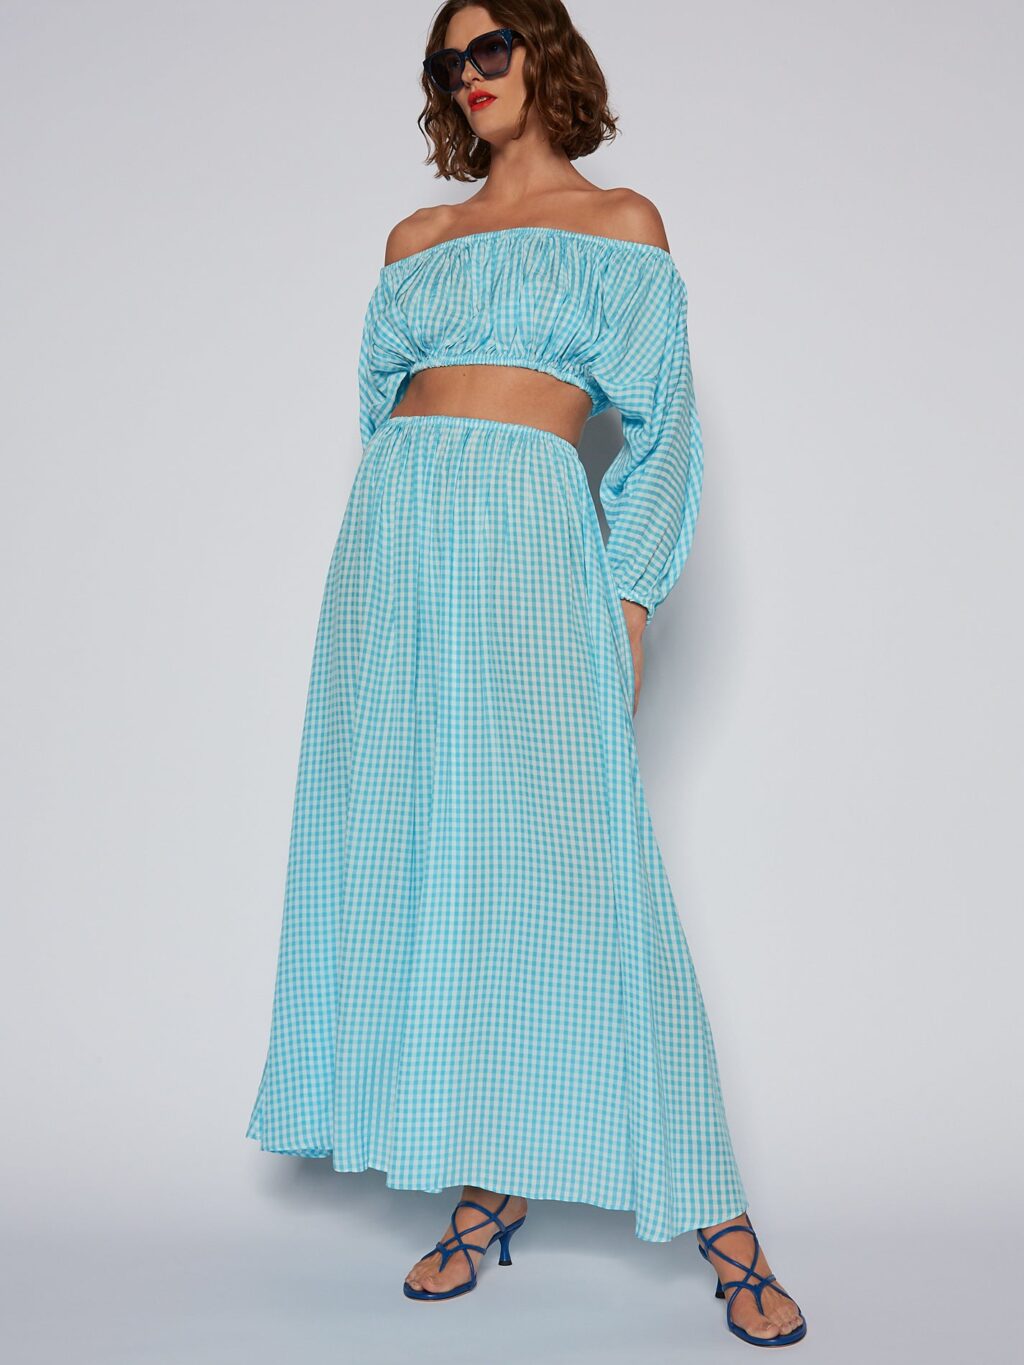 Dress rental. Scanlan Theodore Gingham Cut Out Dress for hire. Blue and white check, strapless sun dress.